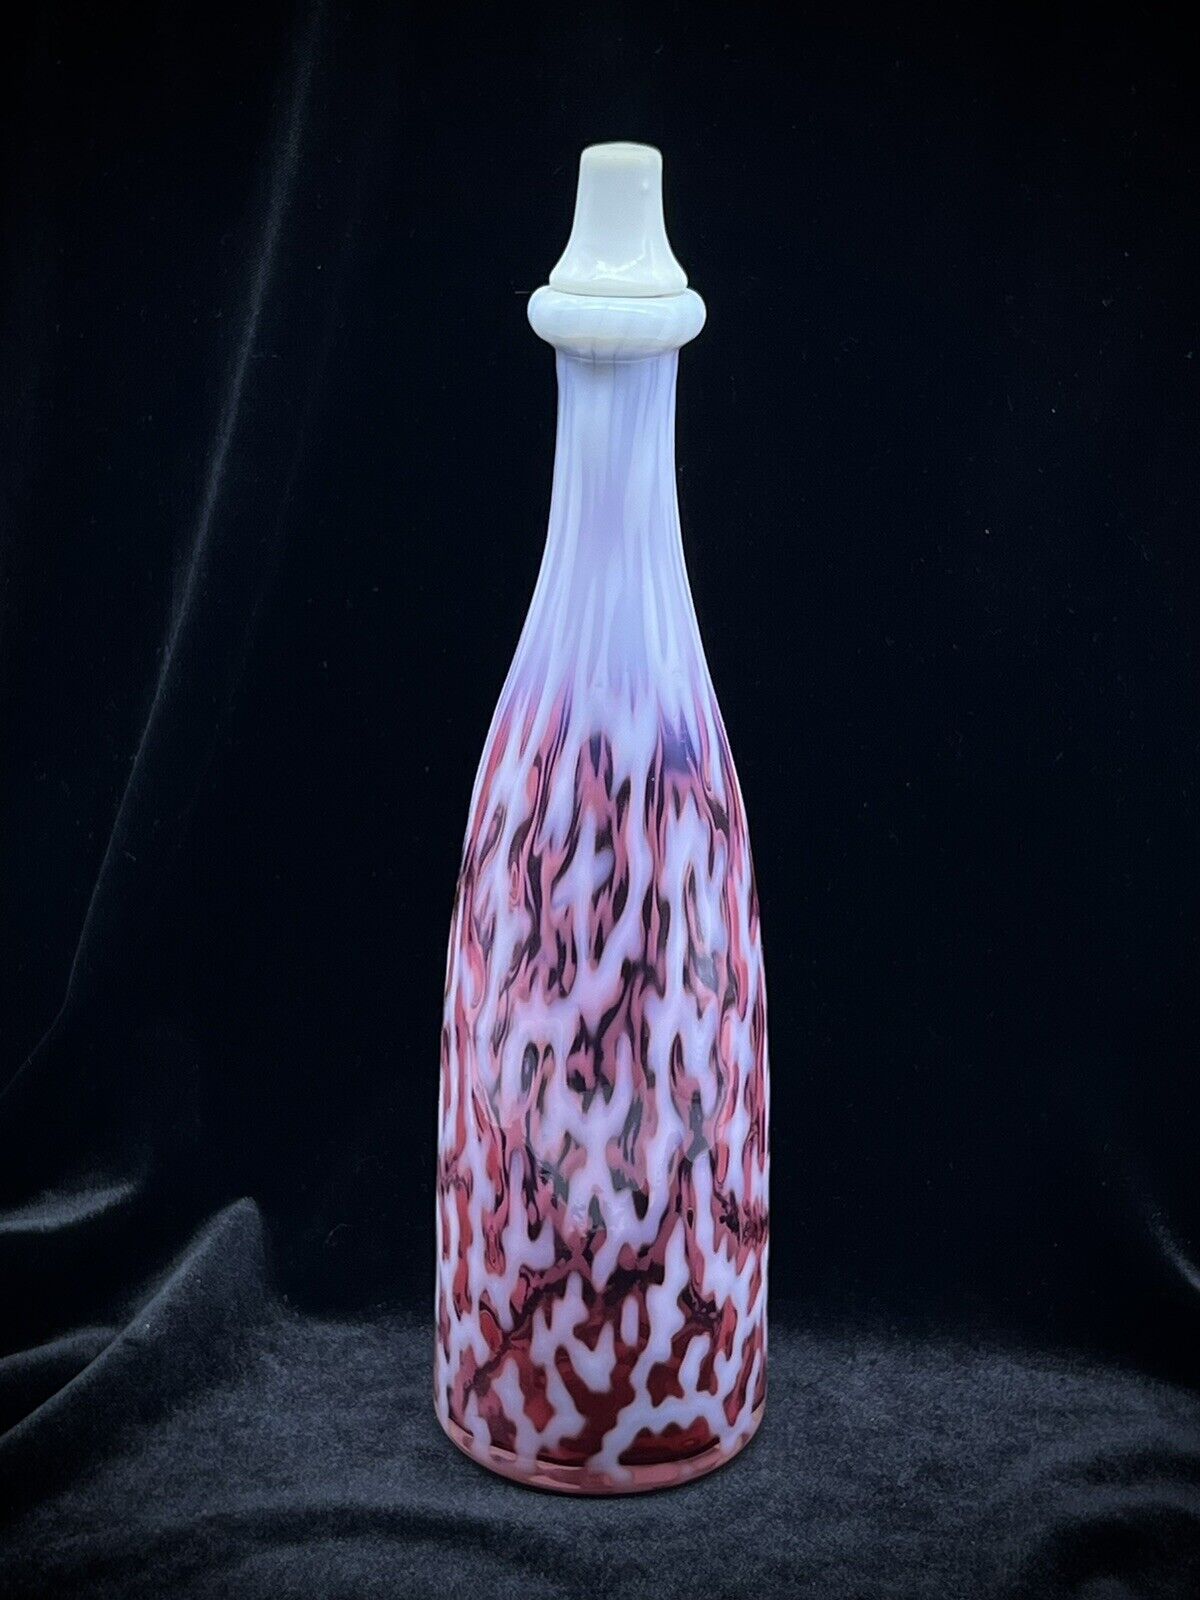 Antique Pontiled Hobbs Opalescent Coral Seaweed Cranberry Bitters/Barber Bottle